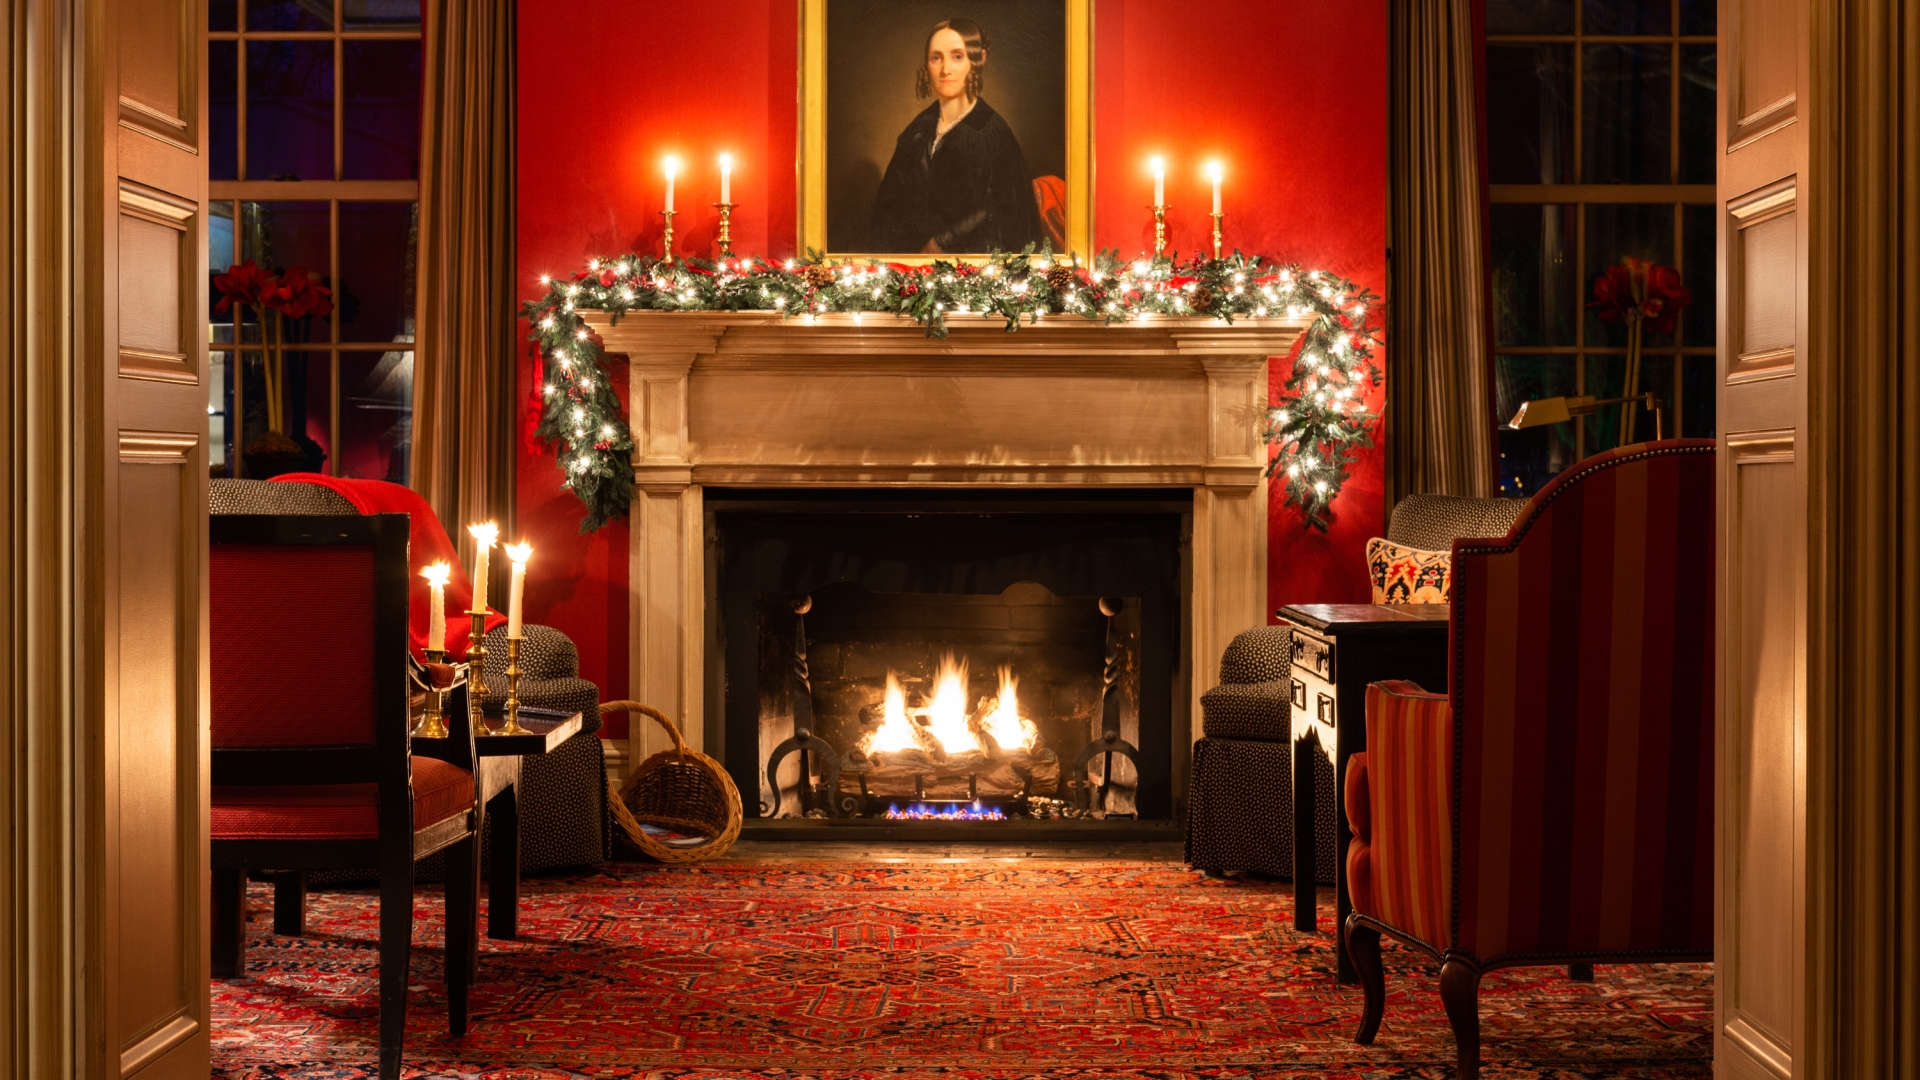 Holiday decor on fireplace in Parlor room.